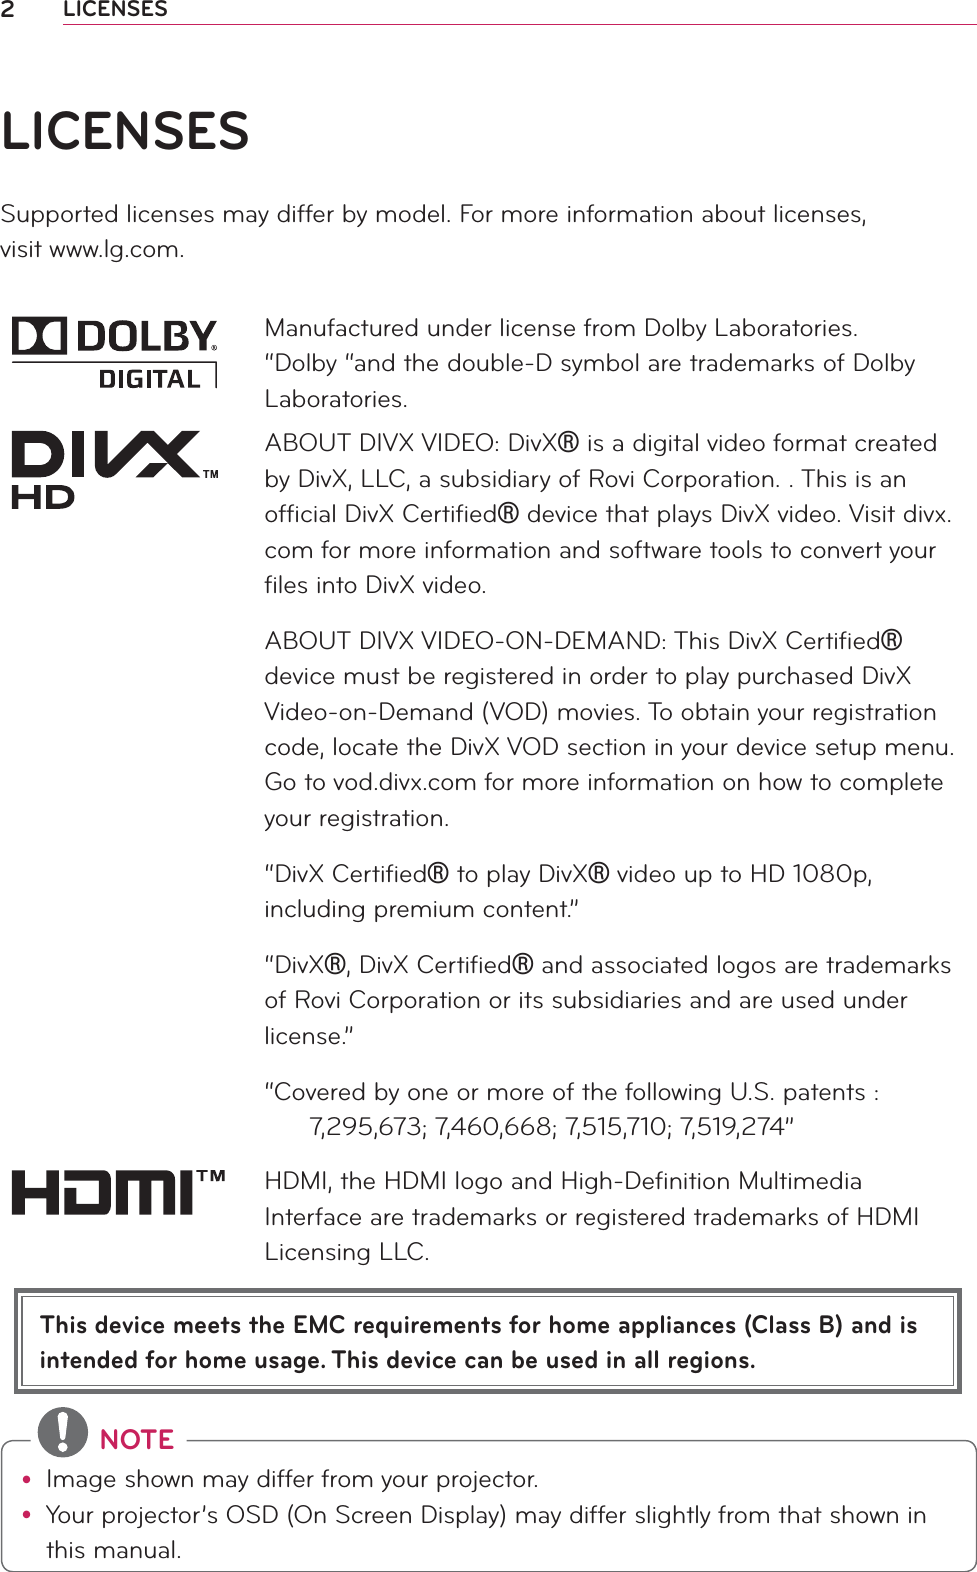 2LICENSESThis device meets the EMC requirements for home appliances (Class B) and is intended for home usage. This device can be used in all regions.LICENSESSupported licenses may differ by model. For more information about licenses,  visit www.lg.com.Manufactured under license from Dolby Laboratories. “Dolby “and the double-D symbol are trademarks of Dolby Laboratories.ABOUT DIVX VIDEO: DivX® is a digital video format created by DivX, LLC, a subsidiary of Rovi Corporation. . This is an ofﬁcial DivX Certiﬁed® device that plays DivX video. Visit divx.com for more information and software tools to convert your ﬁles into DivX video.ABOUT DIVX VIDEO-ON-DEMAND: This DivX Certiﬁed® device must be registered in order to play purchased DivX Video-on-Demand (VOD) movies. To obtain your registration code, locate the DivX VOD section in your device setup menu. Go to vod.divx.com for more information on how to complete your registration. “DivX Certiﬁed® to play DivX® video up to HD 1080p, including premium content.”“DivX®, DivX Certiﬁed® and associated logos are trademarks of Rovi Corporation or its subsidiaries and are used under license.”“Covered by one or more of the following U.S. patents :        7,295,673; 7,460,668; 7,515,710; 7,519,274”HDMI, the HDMI logo and High-Deﬁnition Multimedia Interface are trademarks or registered trademarks of HDMI Licensing LLC. NOTEy Image shown may differ from your projector.y Your projector’s OSD (On Screen Display) may differ slightly from that shown in this manual.